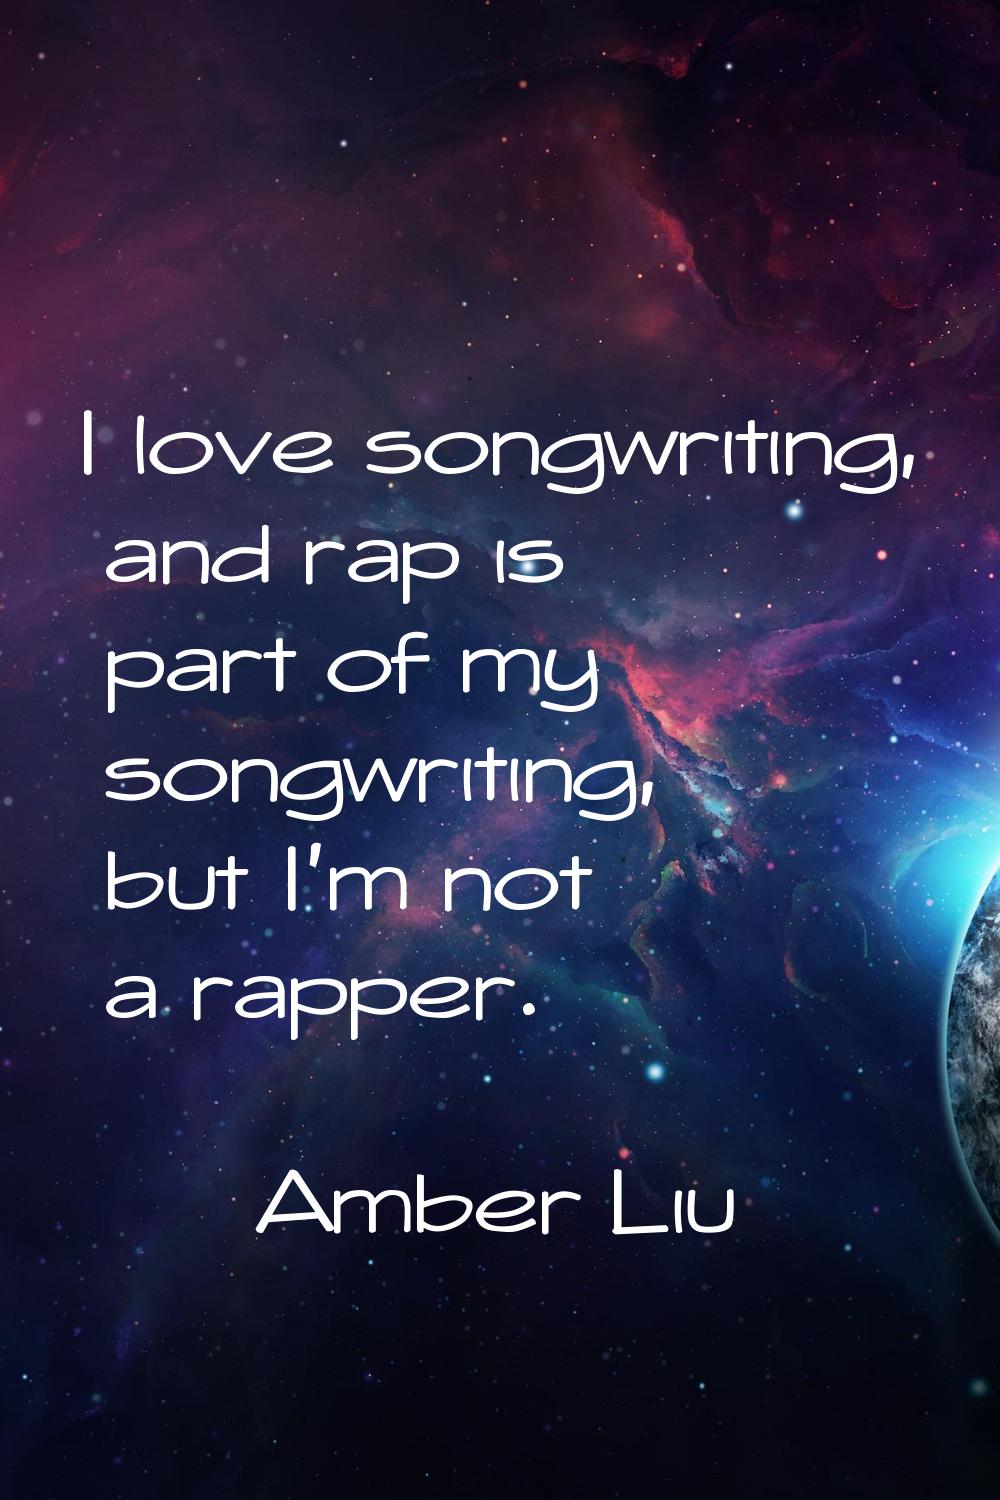 I love songwriting, and rap is part of my songwriting, but I'm not a rapper.